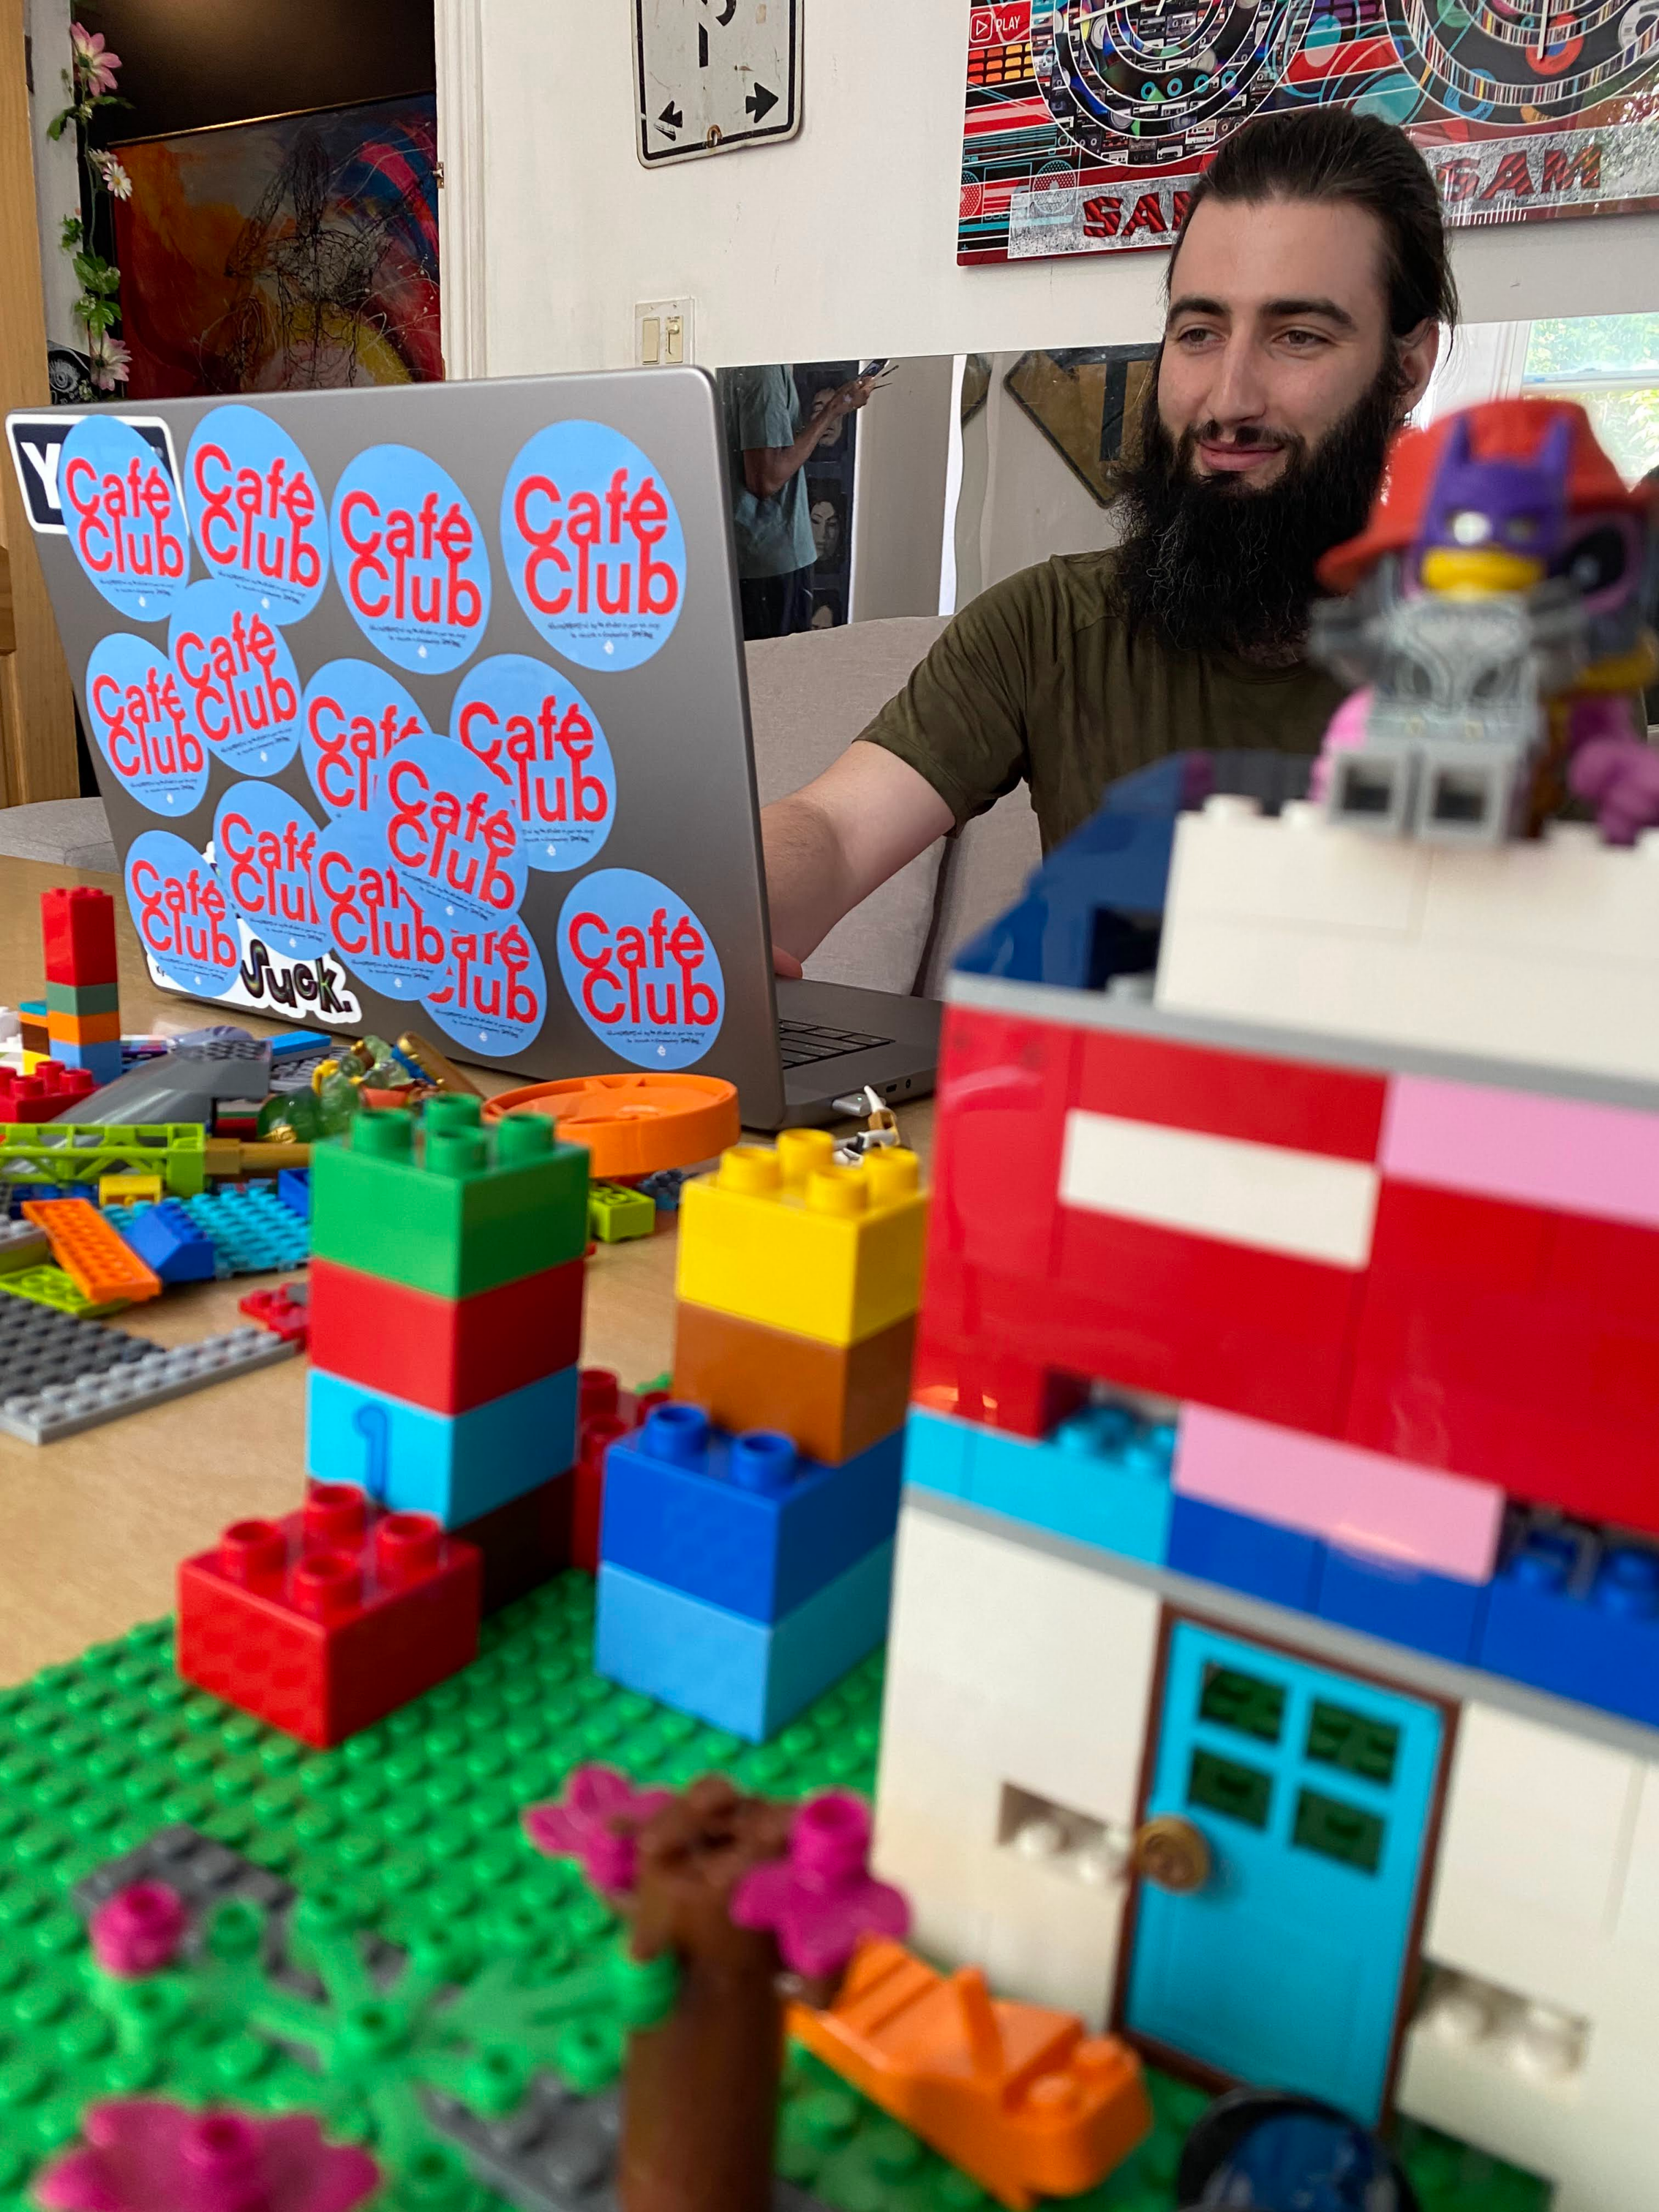 AJ Shoy, Café Club's creator, sits at a table typing on a laptop in the background, as a lego version of the café sits on the table beside him.